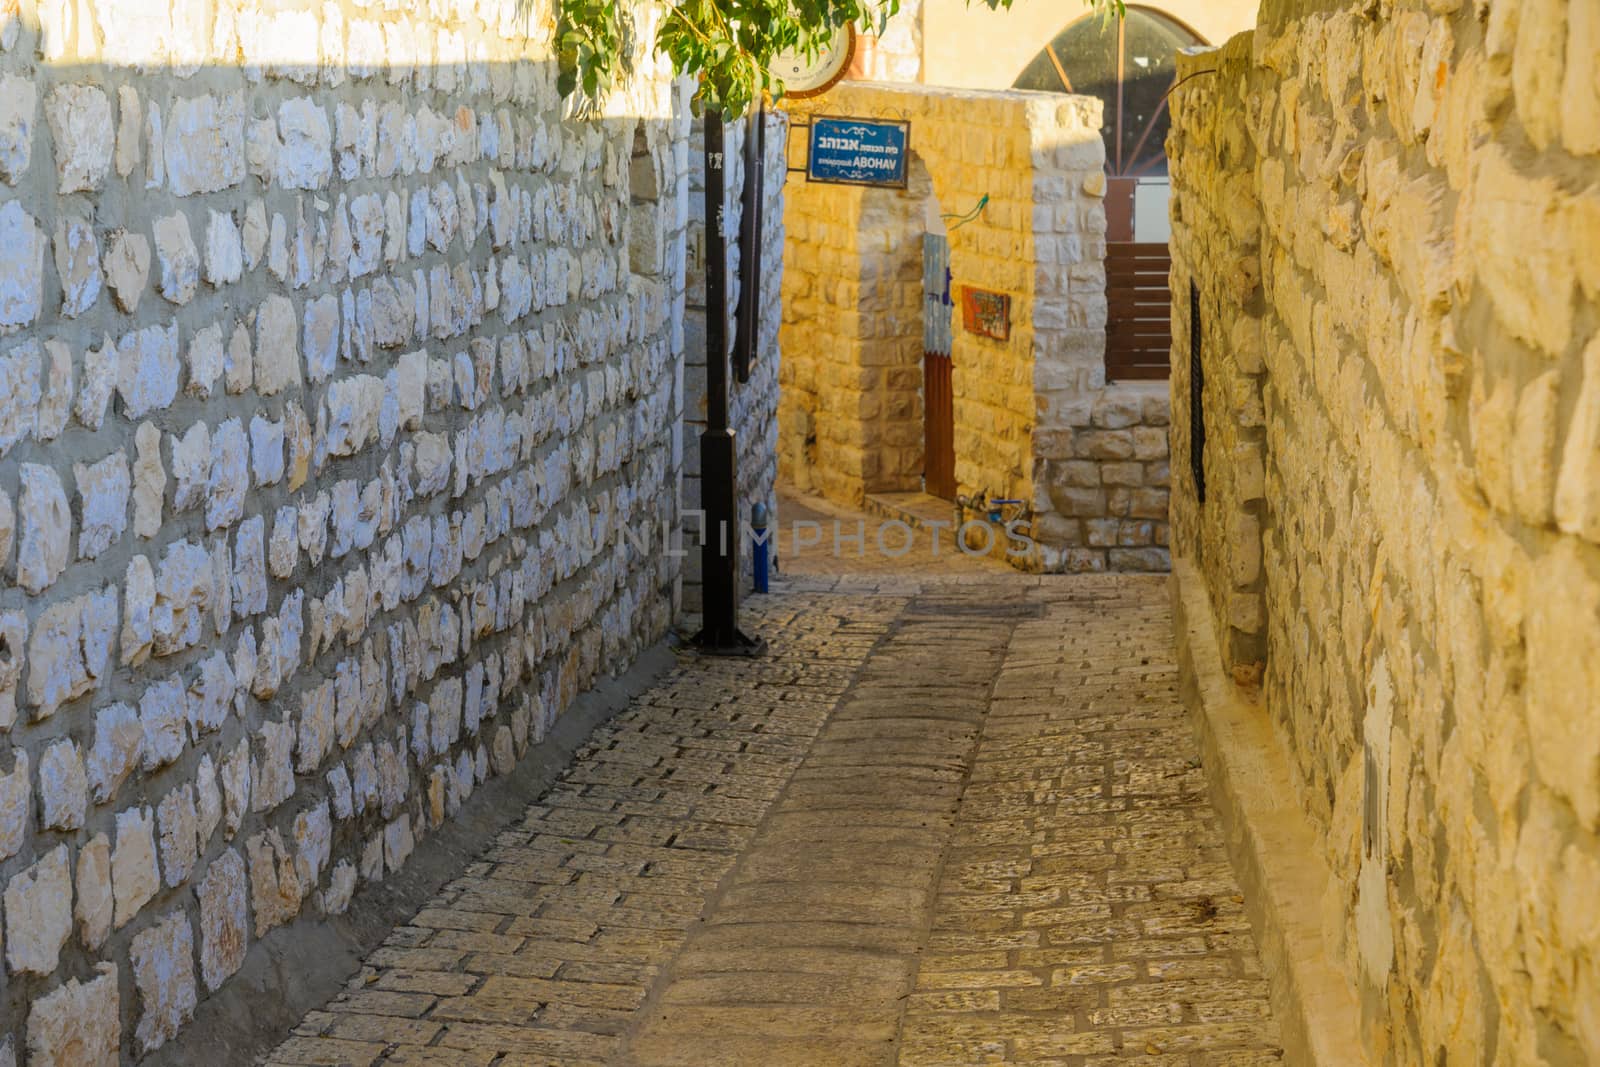 Alley with the Abuhav Synagogue sign, in Safed (Tzfat) by RnDmS